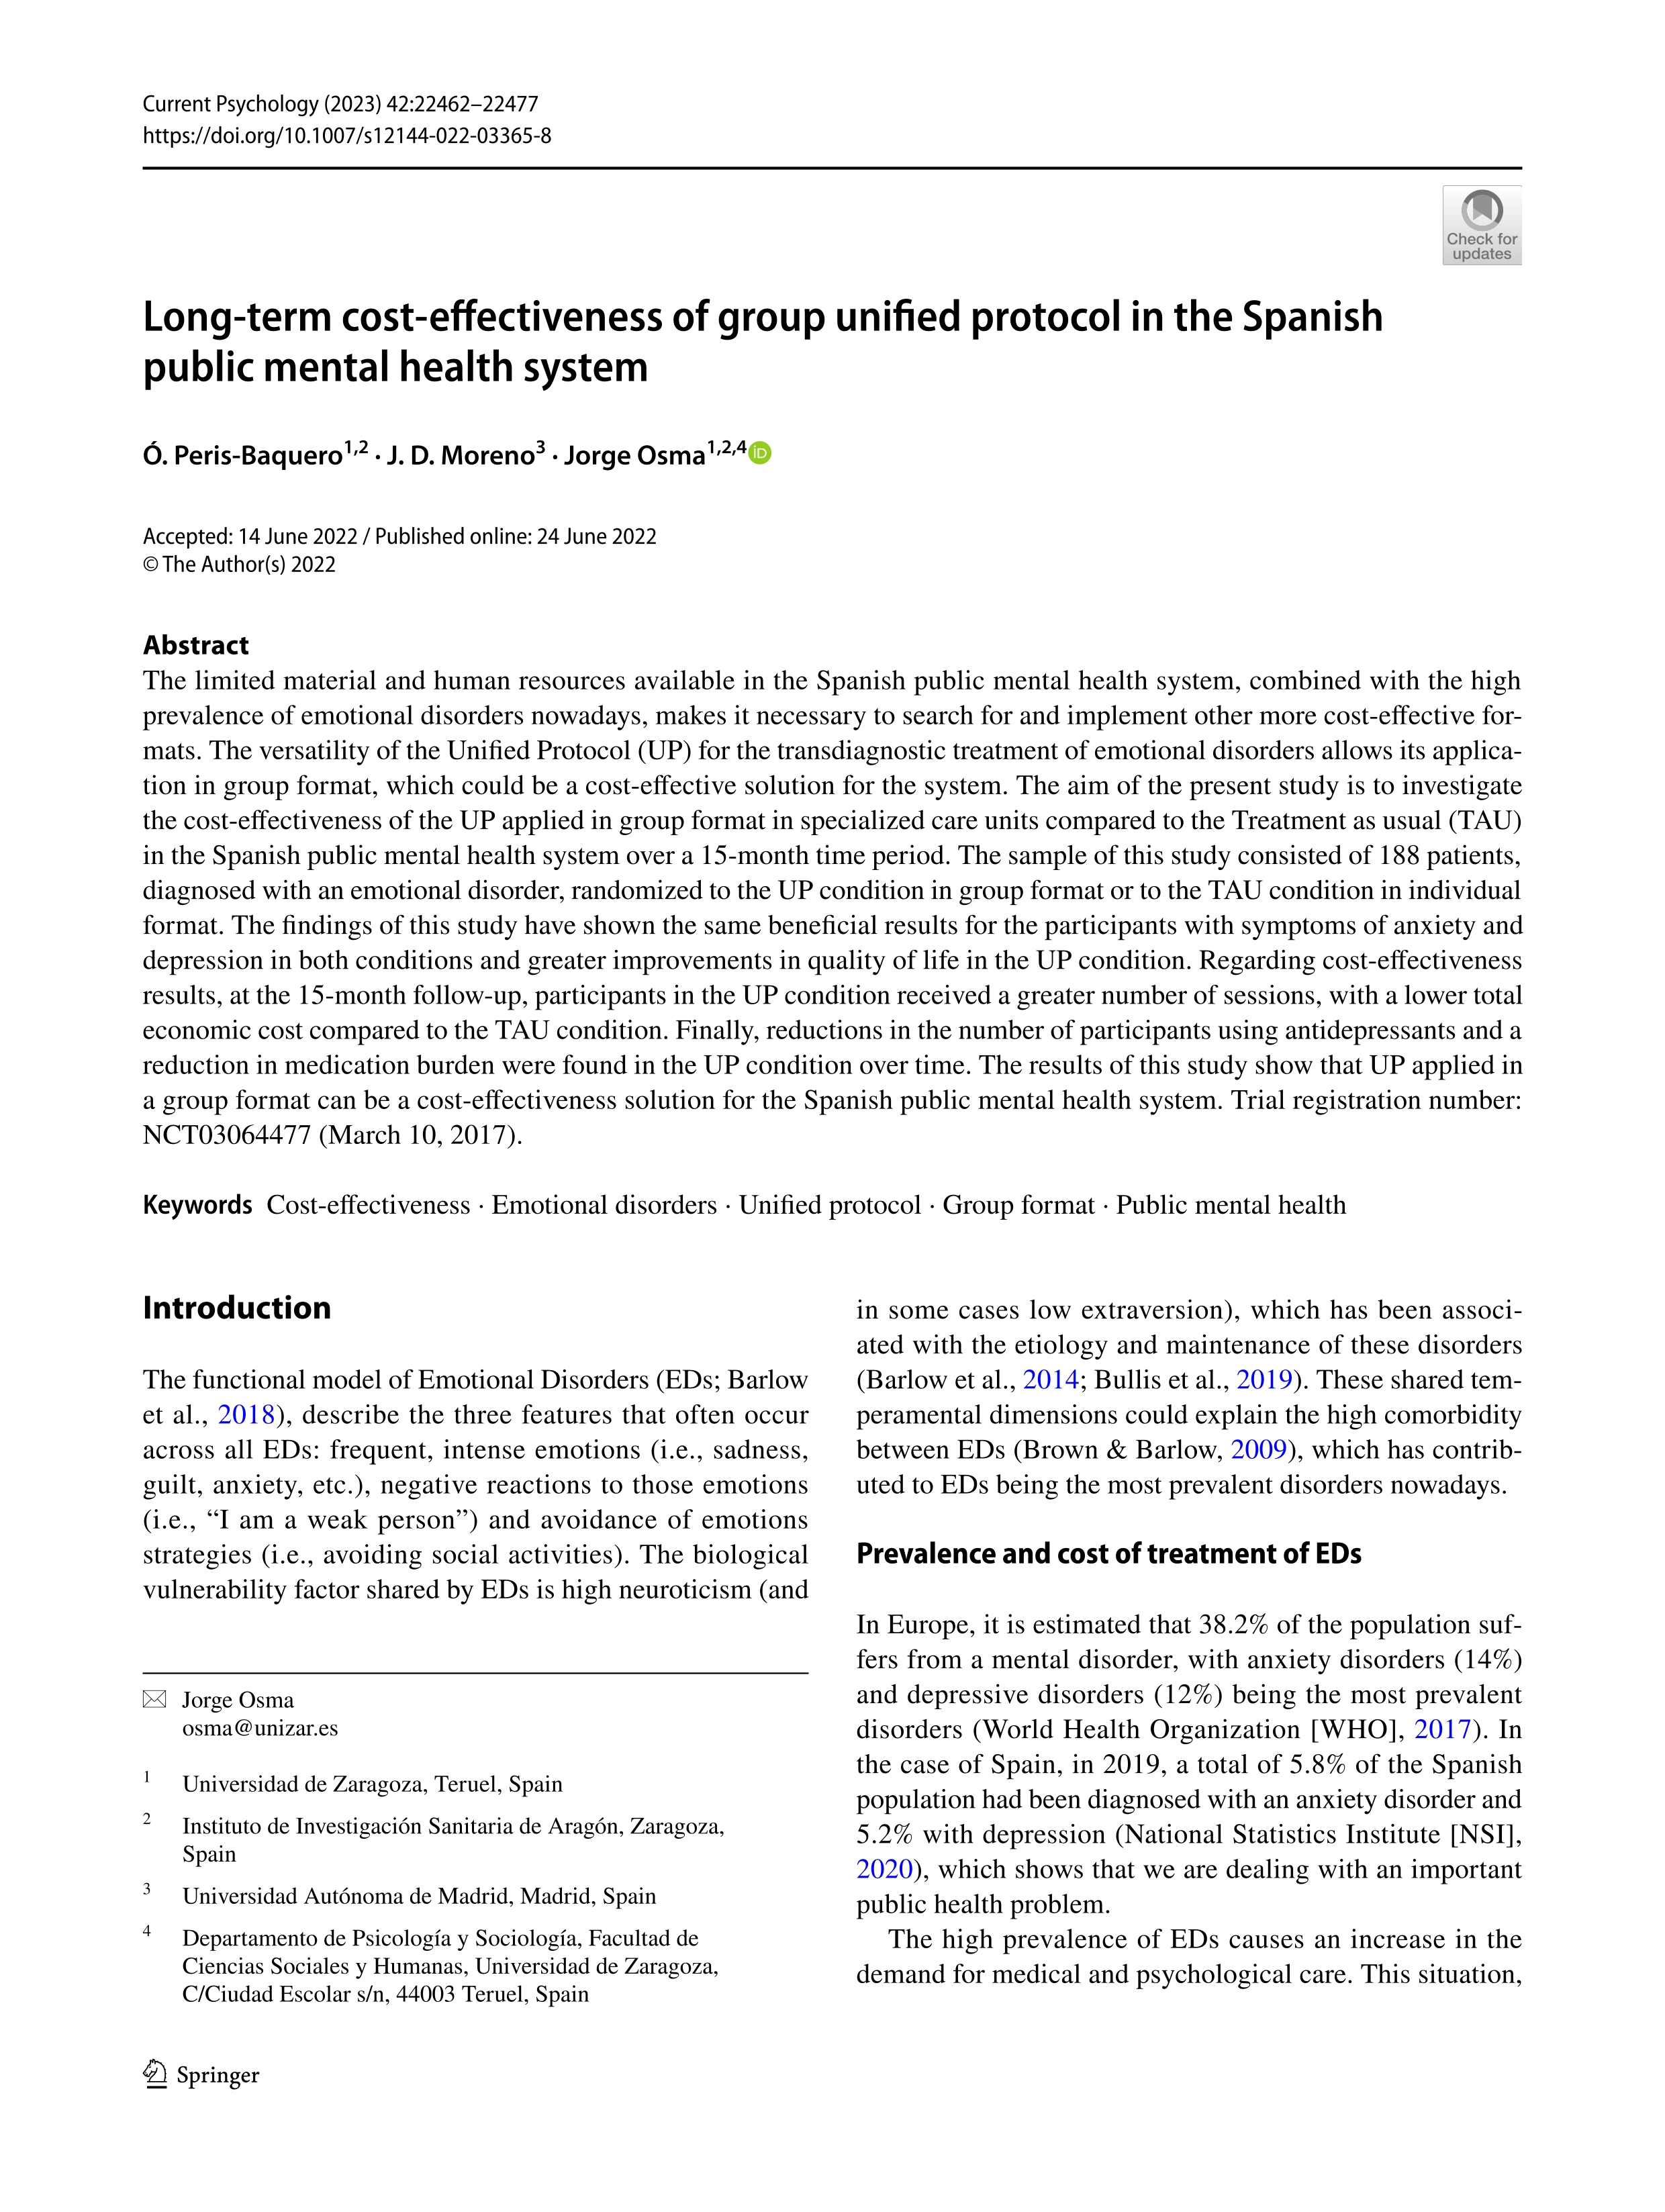 Long-term cost-effectiveness of group unified protocol in the spanish public mental health system